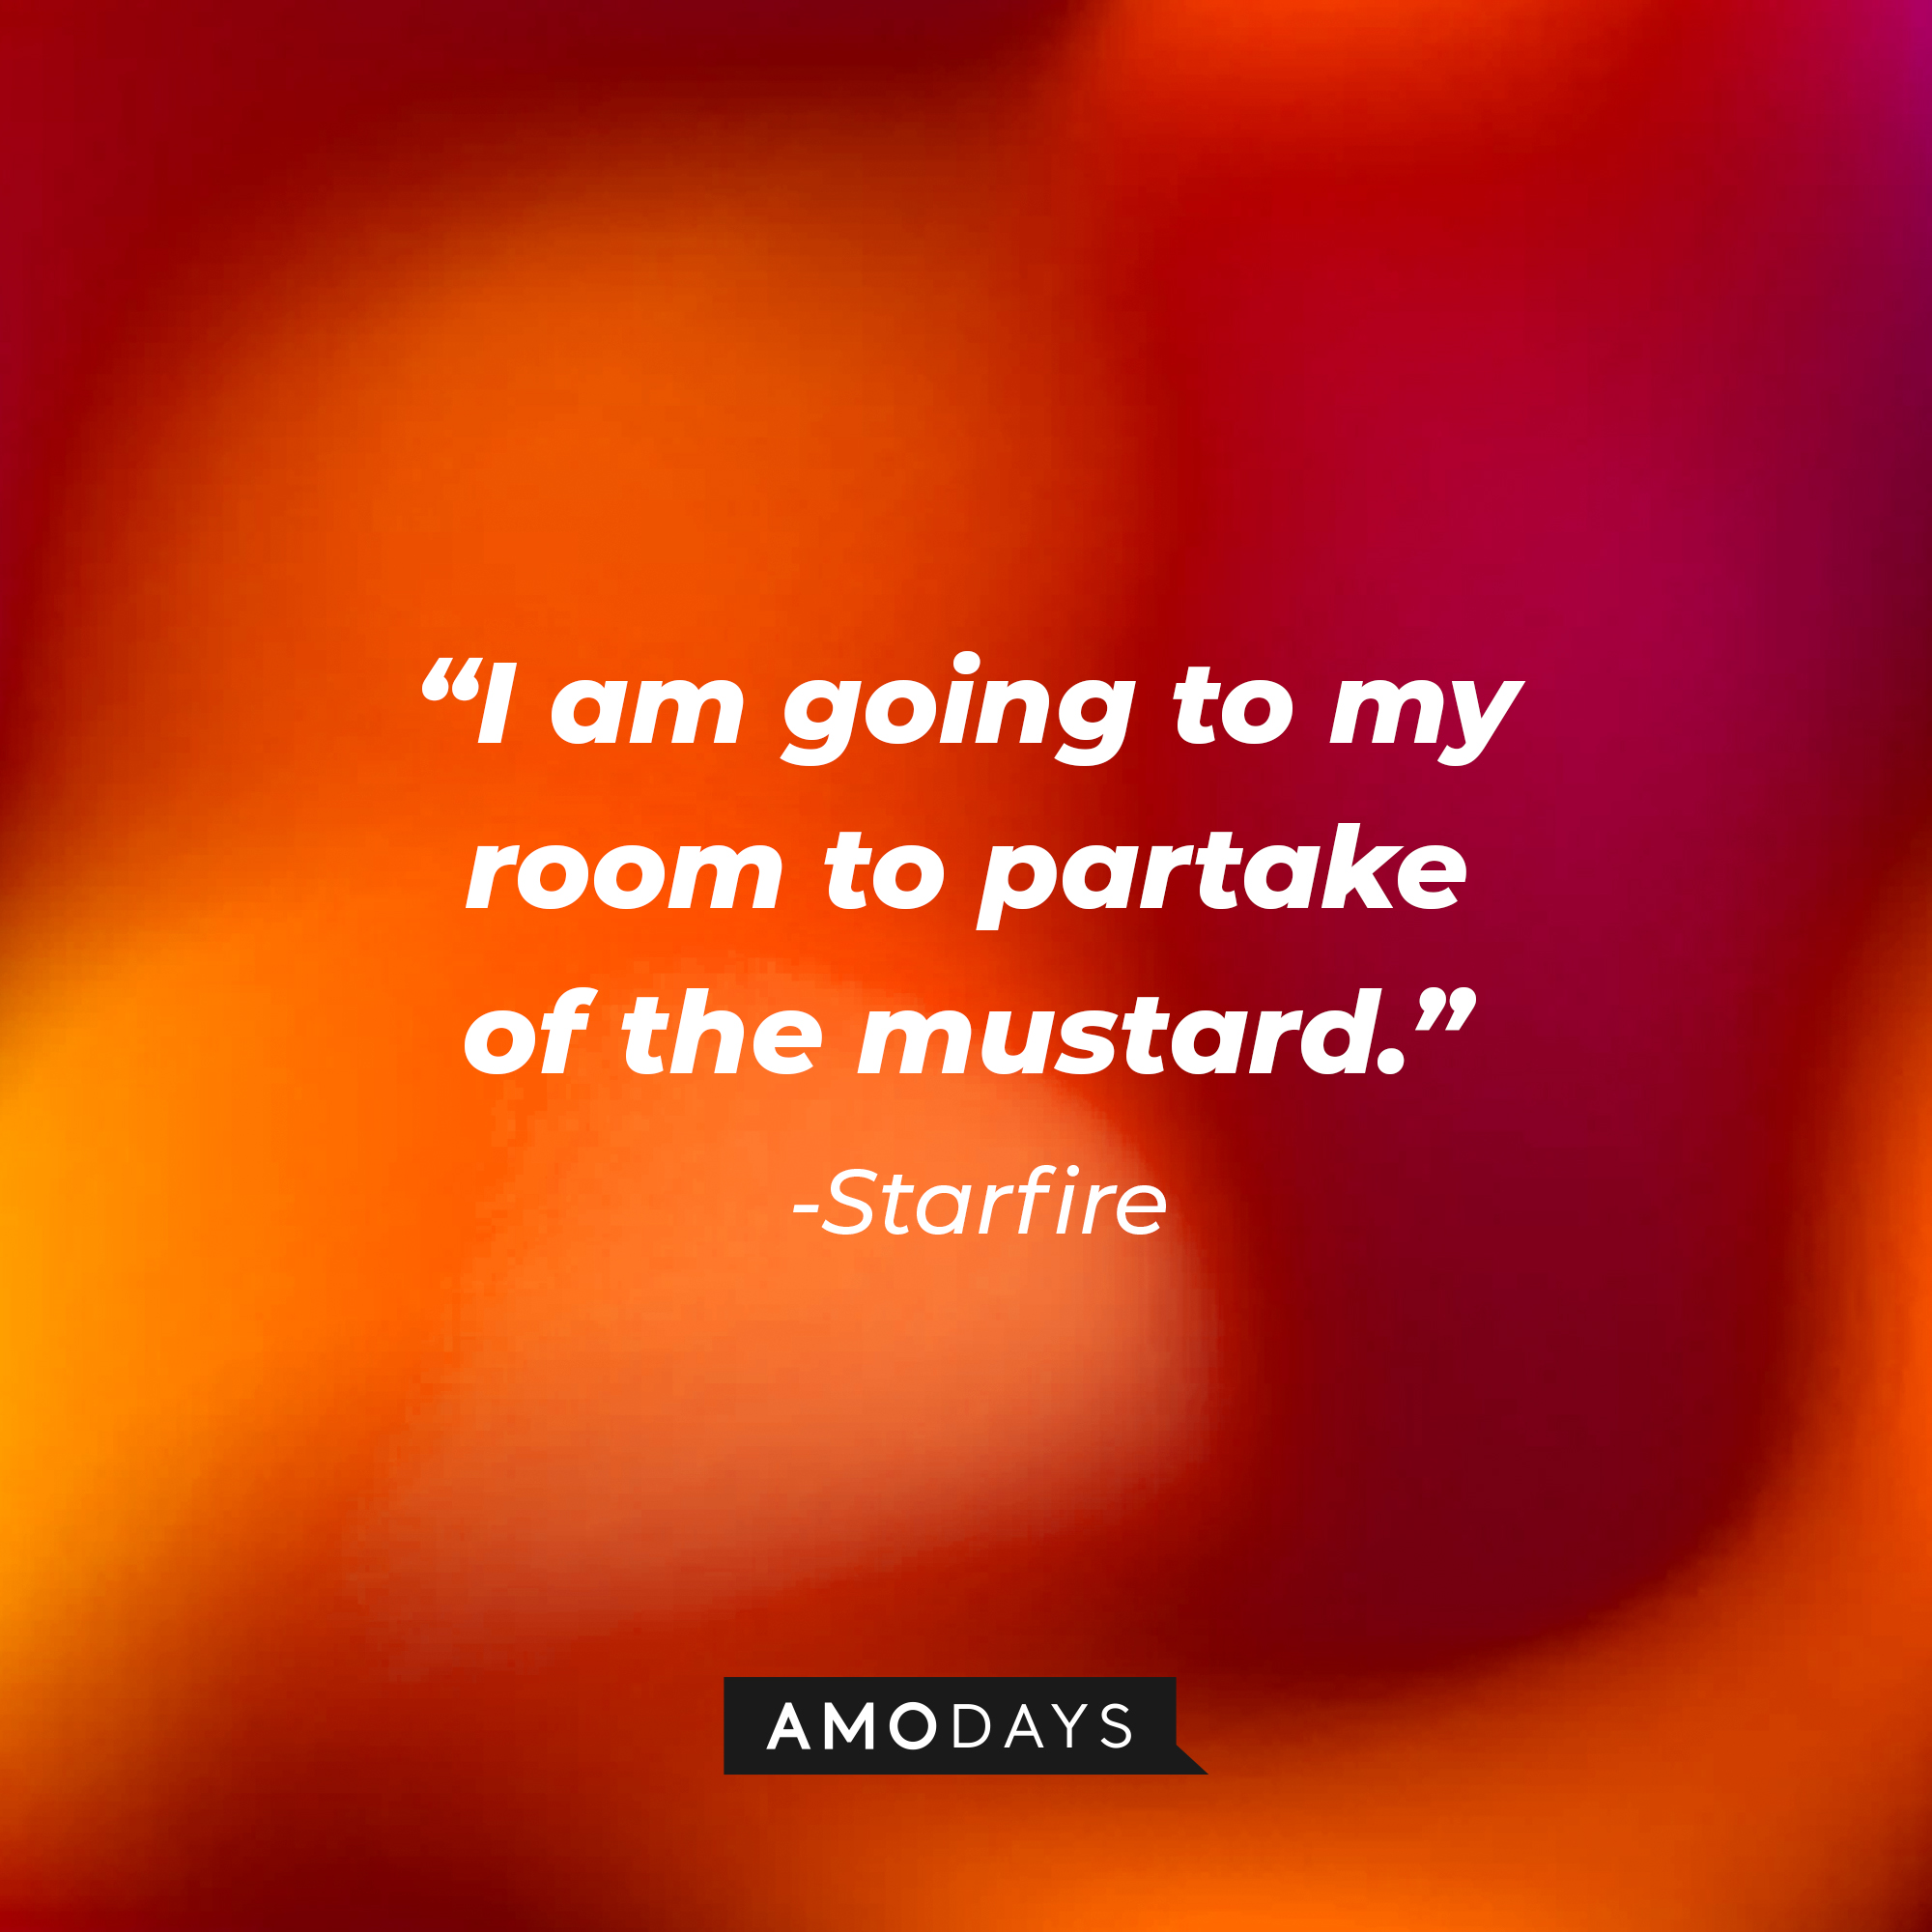 Starfire’s quote:  "I am going to my room to partake of the mustard." | Source: AmoDays